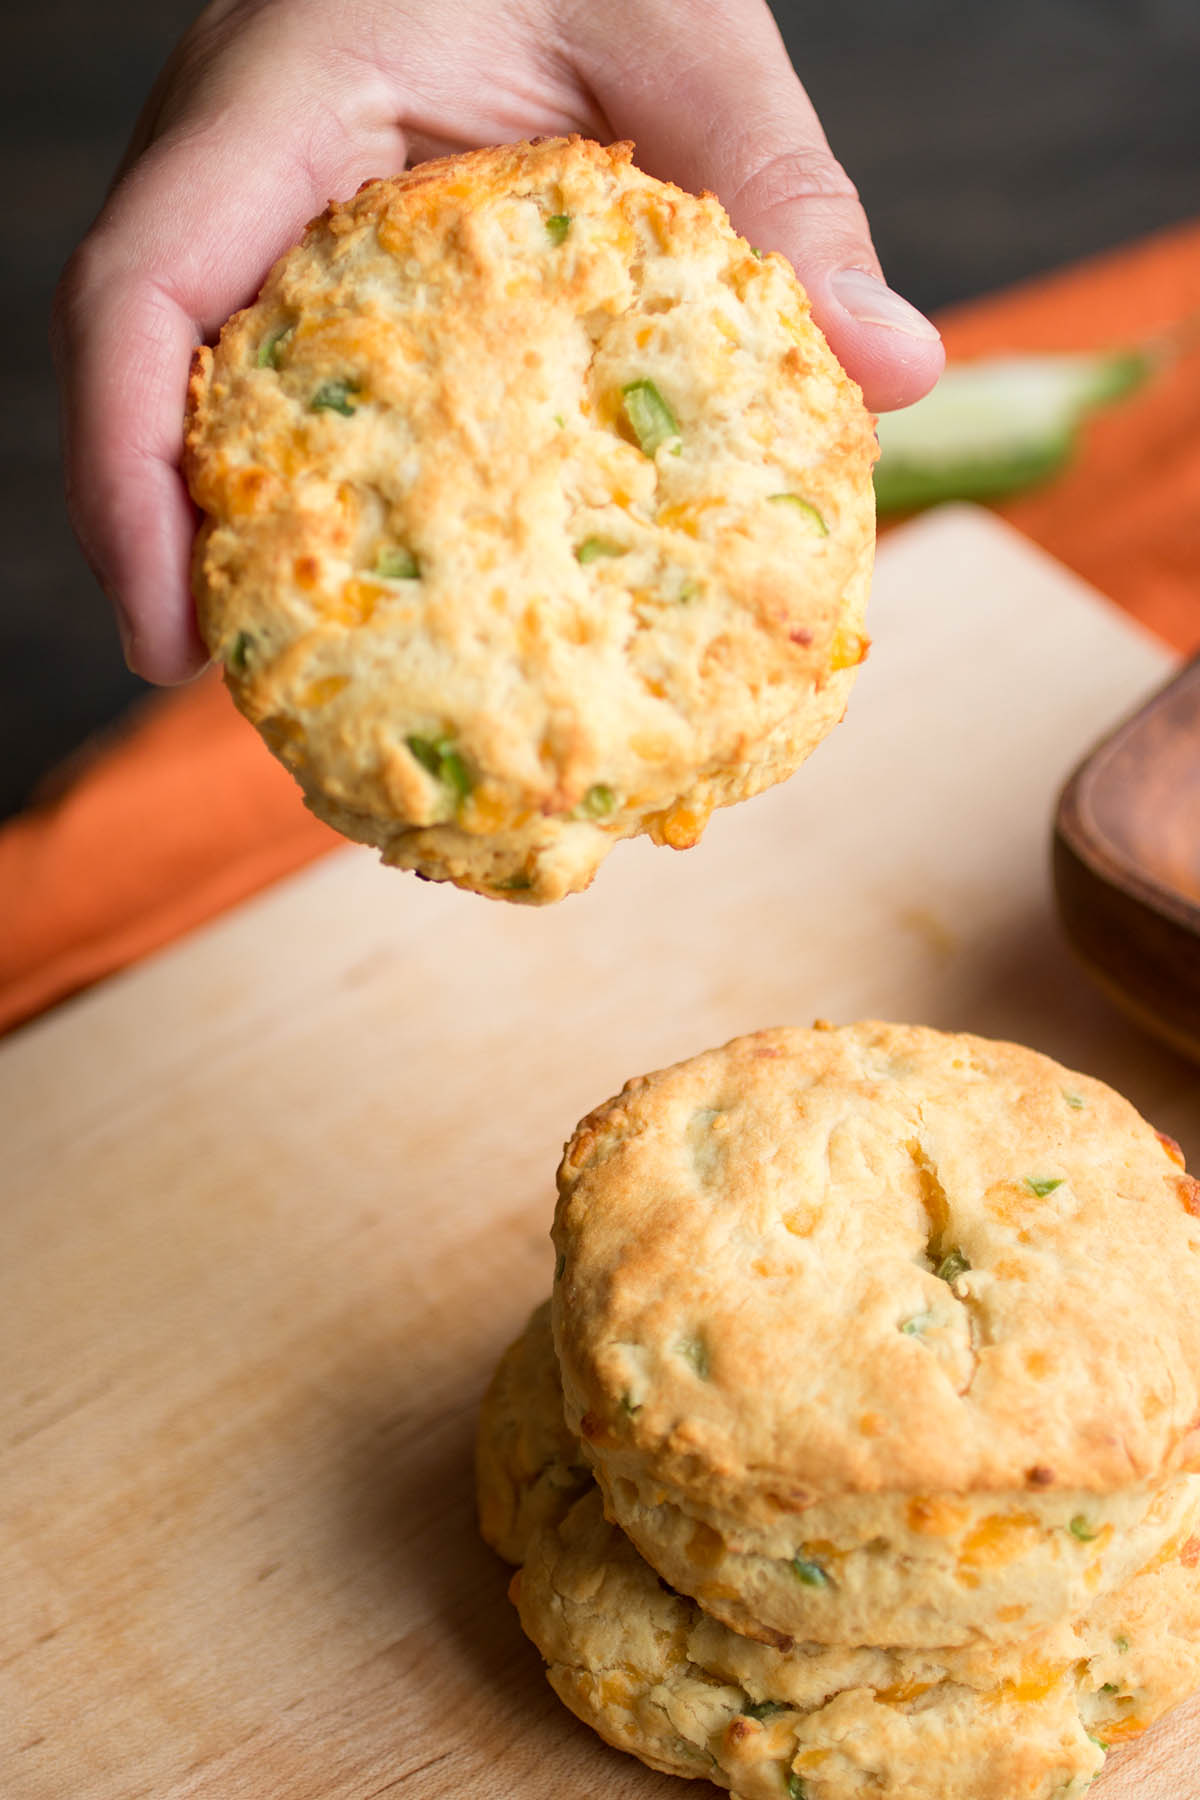 Holding one of the Homemade Cheddar-Jalapeno Biscuits